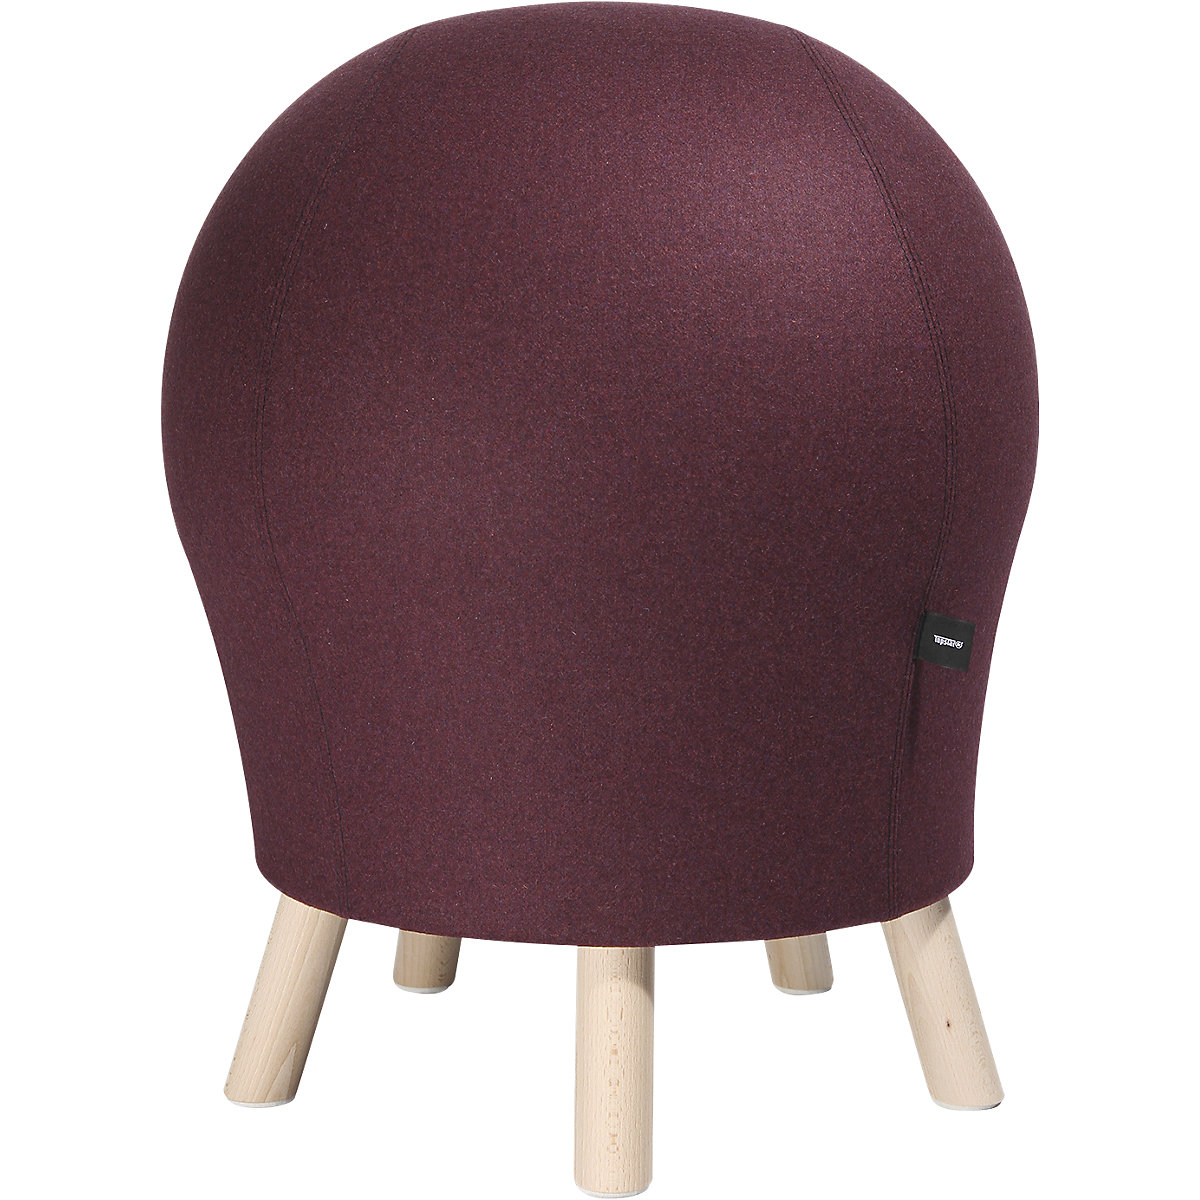 SITNESS 5 ALPINE fitness stool – Topstar, seat height approx. 620 mm, bordeaux cover-4